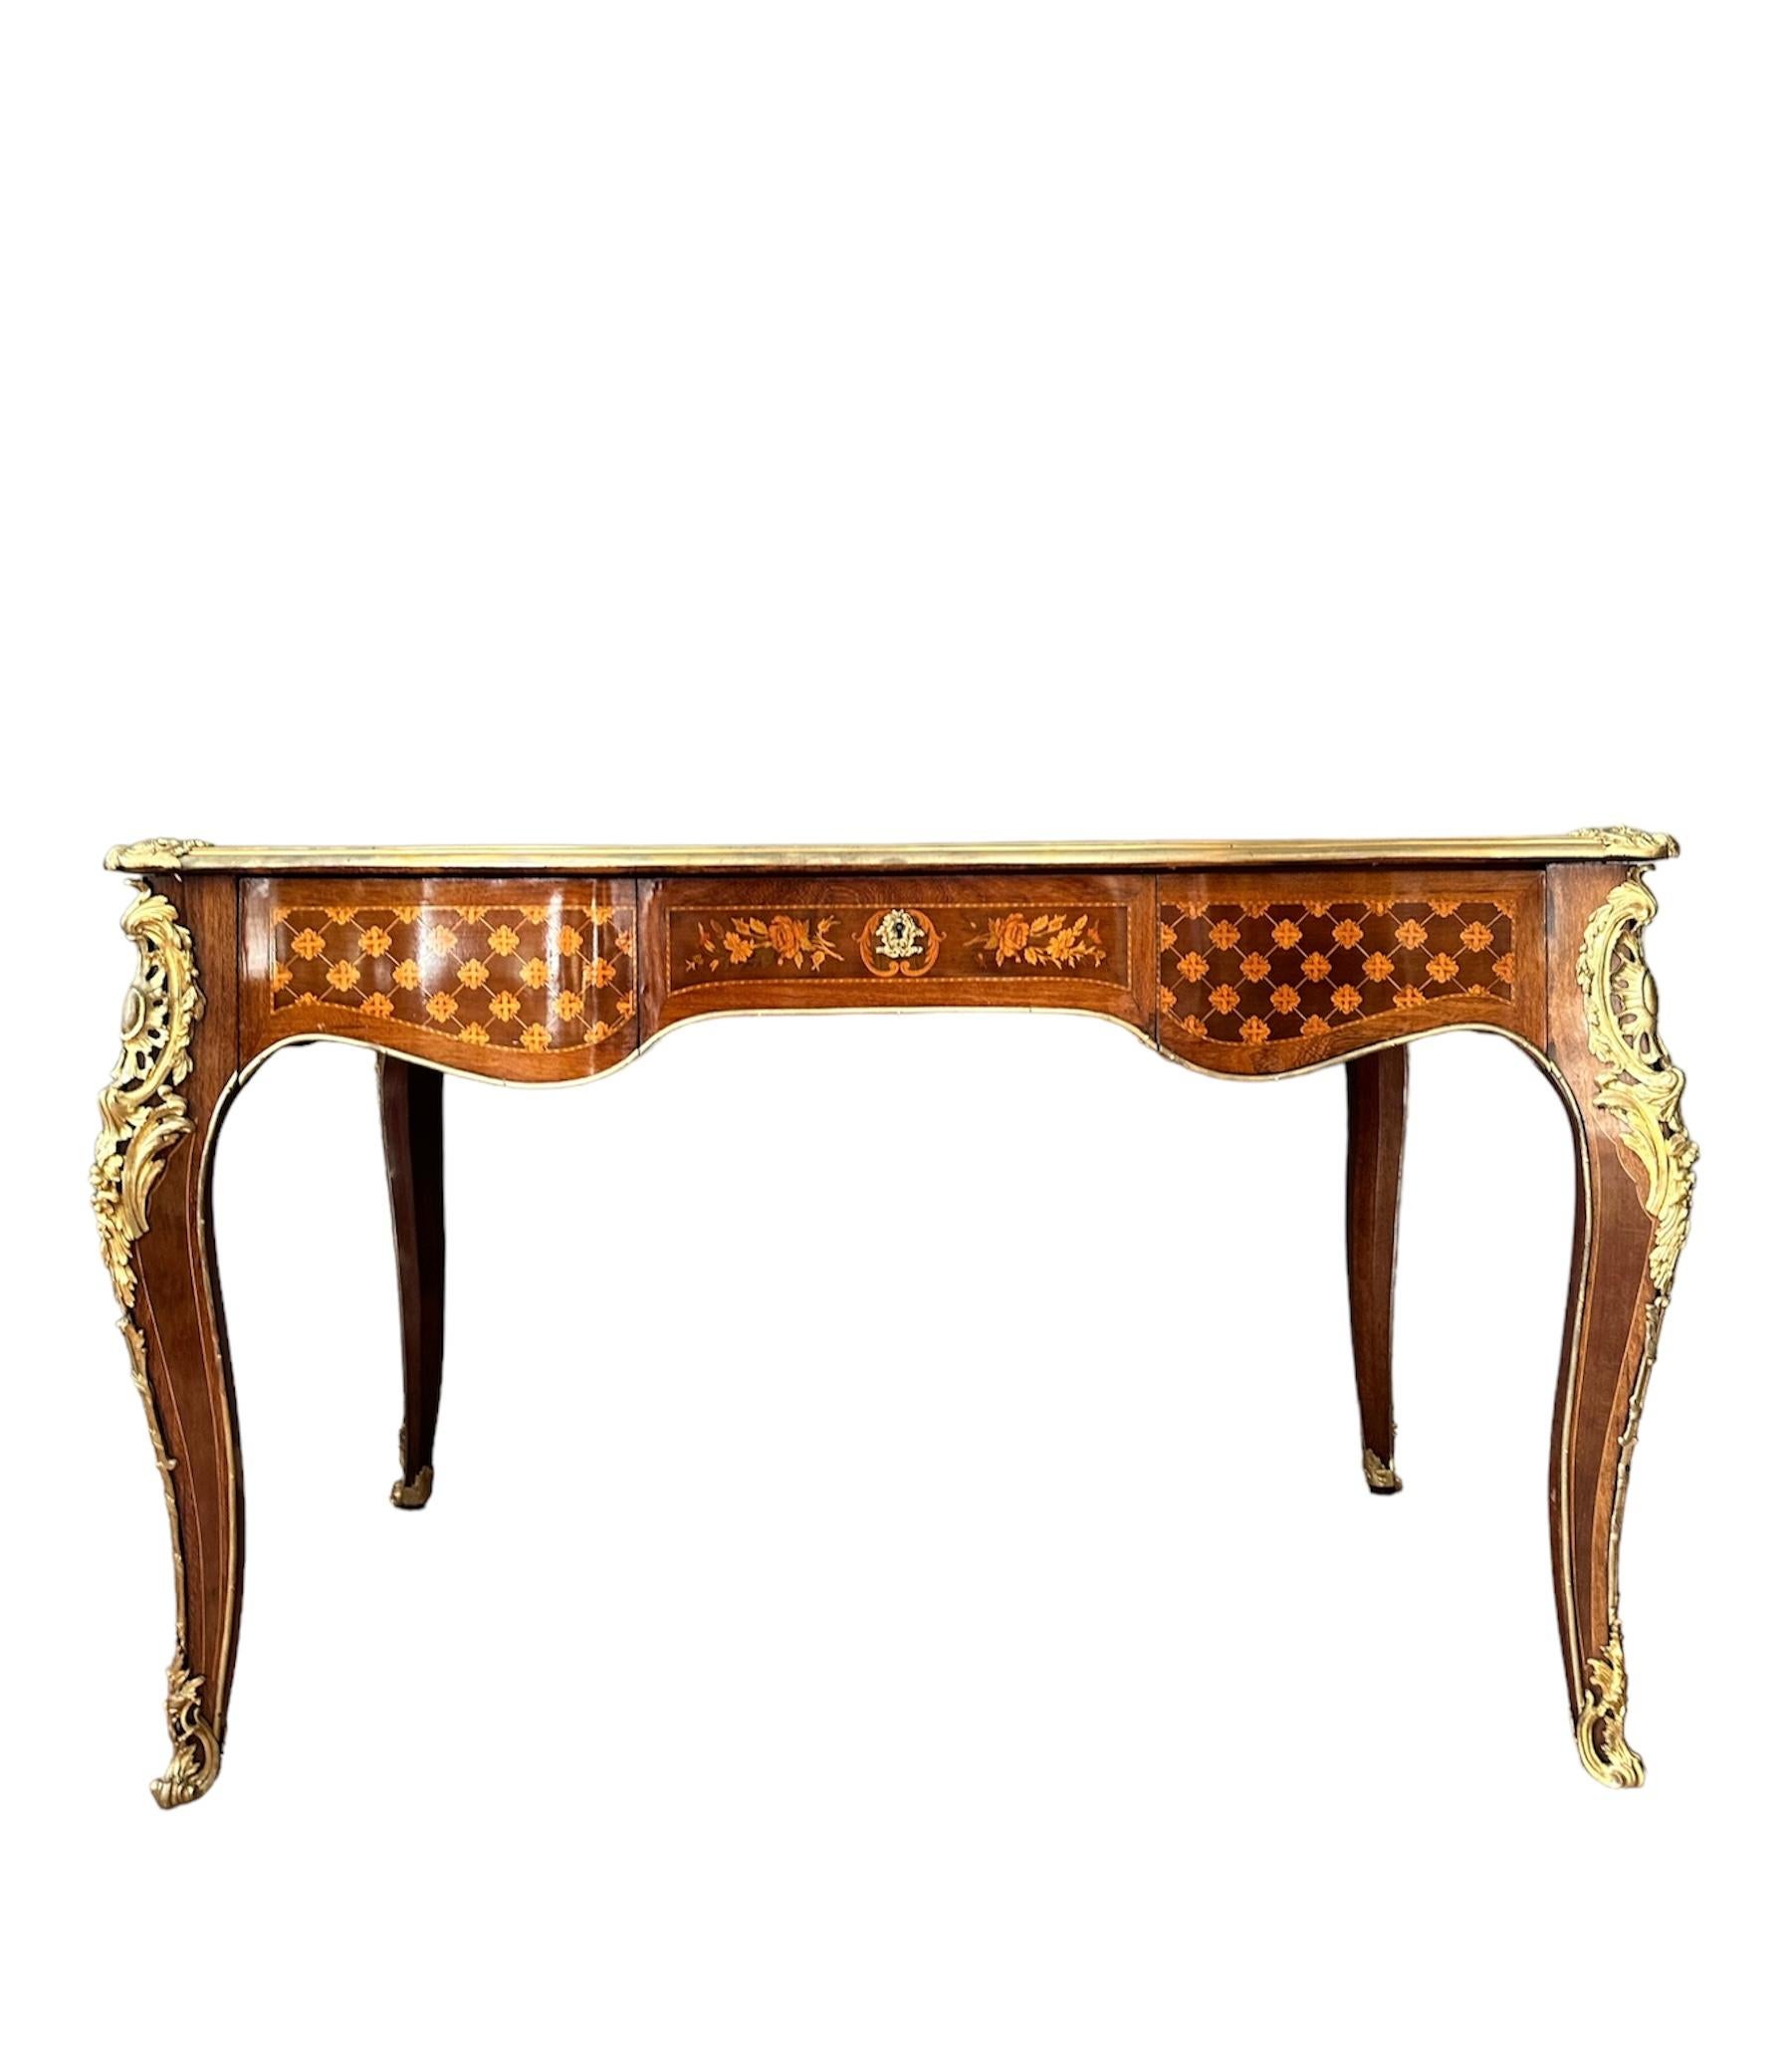 19th Century Inlaid Desk Mounted with Gilded Bronzes, by Paul Sormani 2